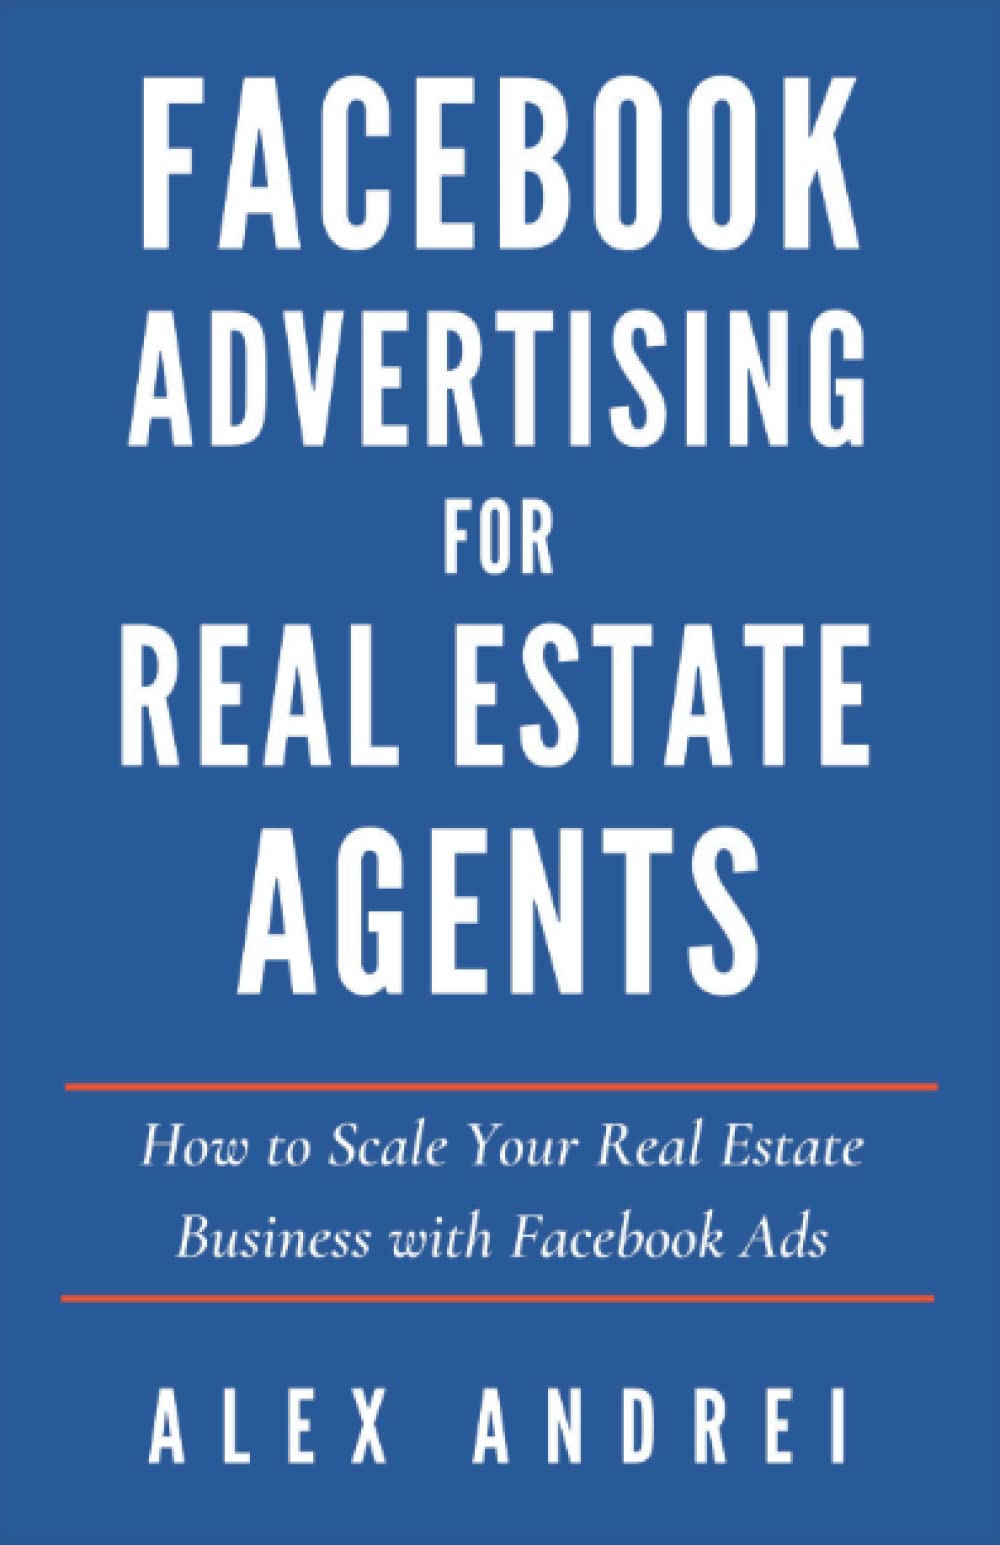 Facebook Advertising for Real Estate Agents written by Alex Andrei book cover